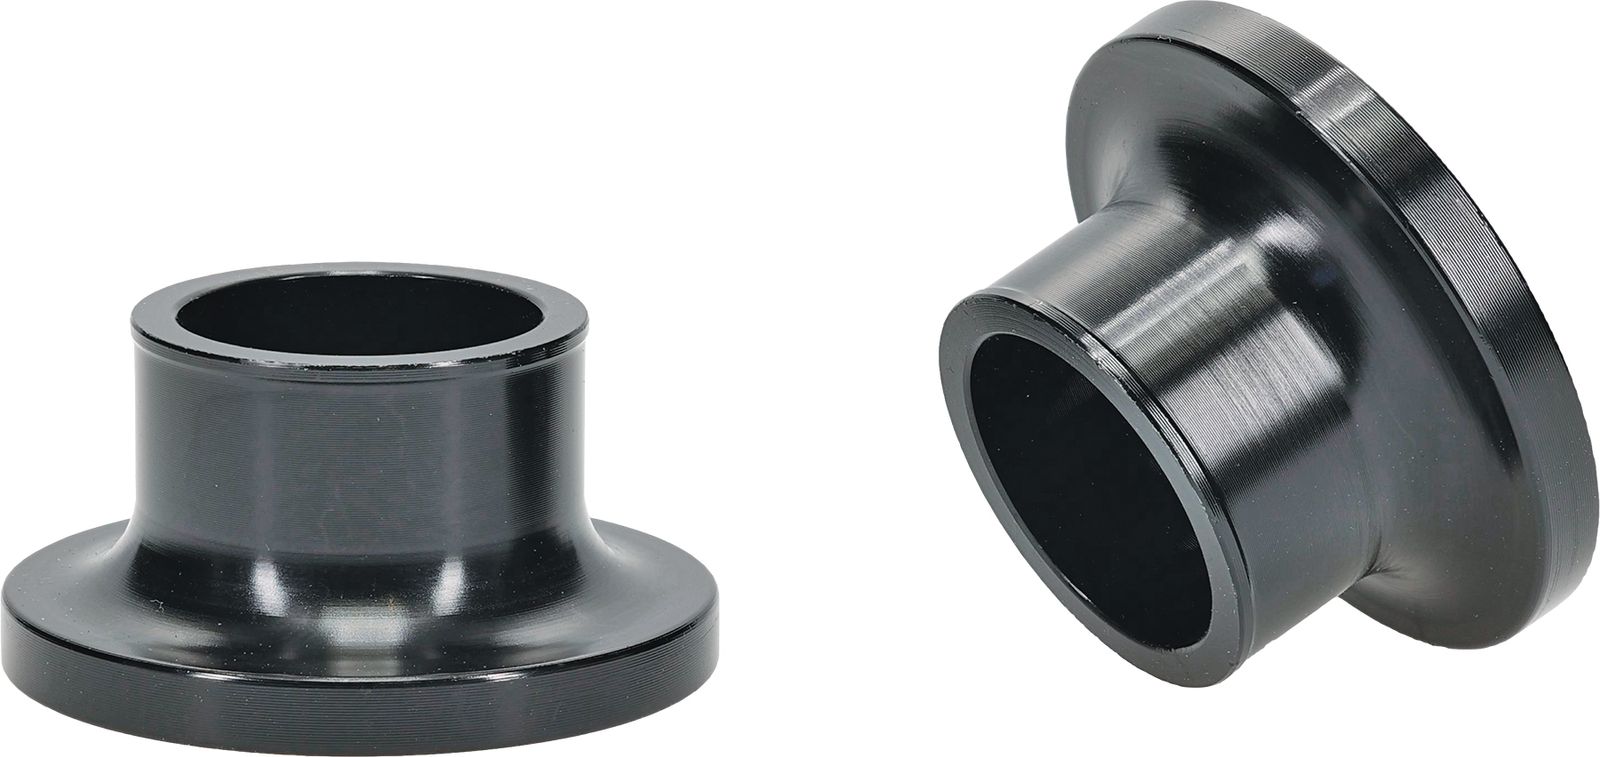 Wrp Rear Wheel Spacer Kits - WRP111041 image